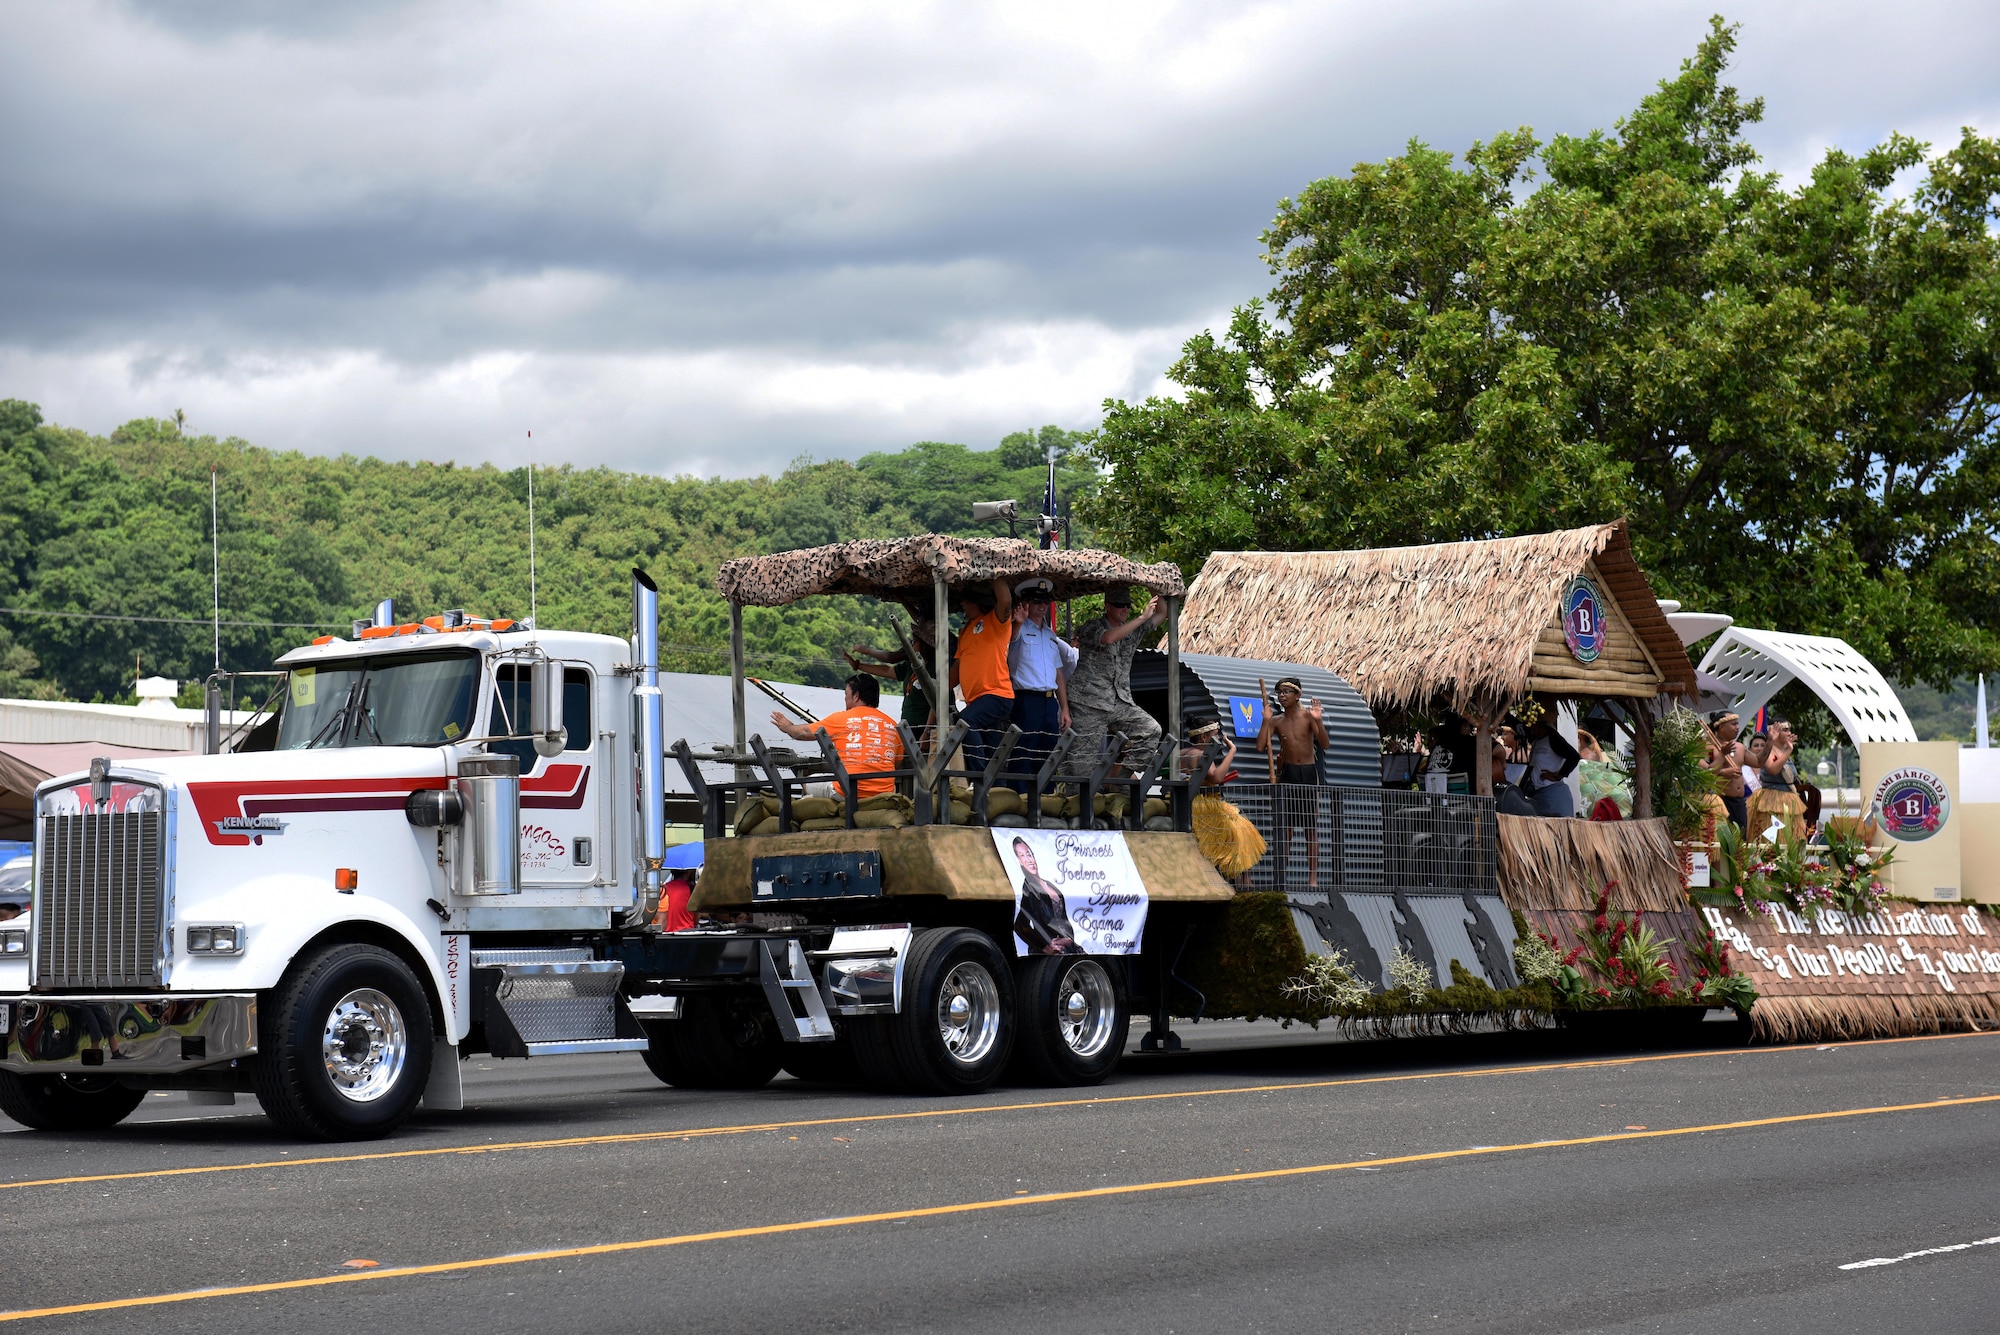 U.S Service members and local citizens participate in the 72nd Guam Liberation Day parade July 21, 2016, in Hagåtña, Guam. Liberation Day is celebrated every year on July 21 to mark the day Guam was liberated by U.S armed forces from Japanese occupation during World War II. (U.S. Air Force photo by Tech Sgt. Richard P. Ebensberger/Released)
